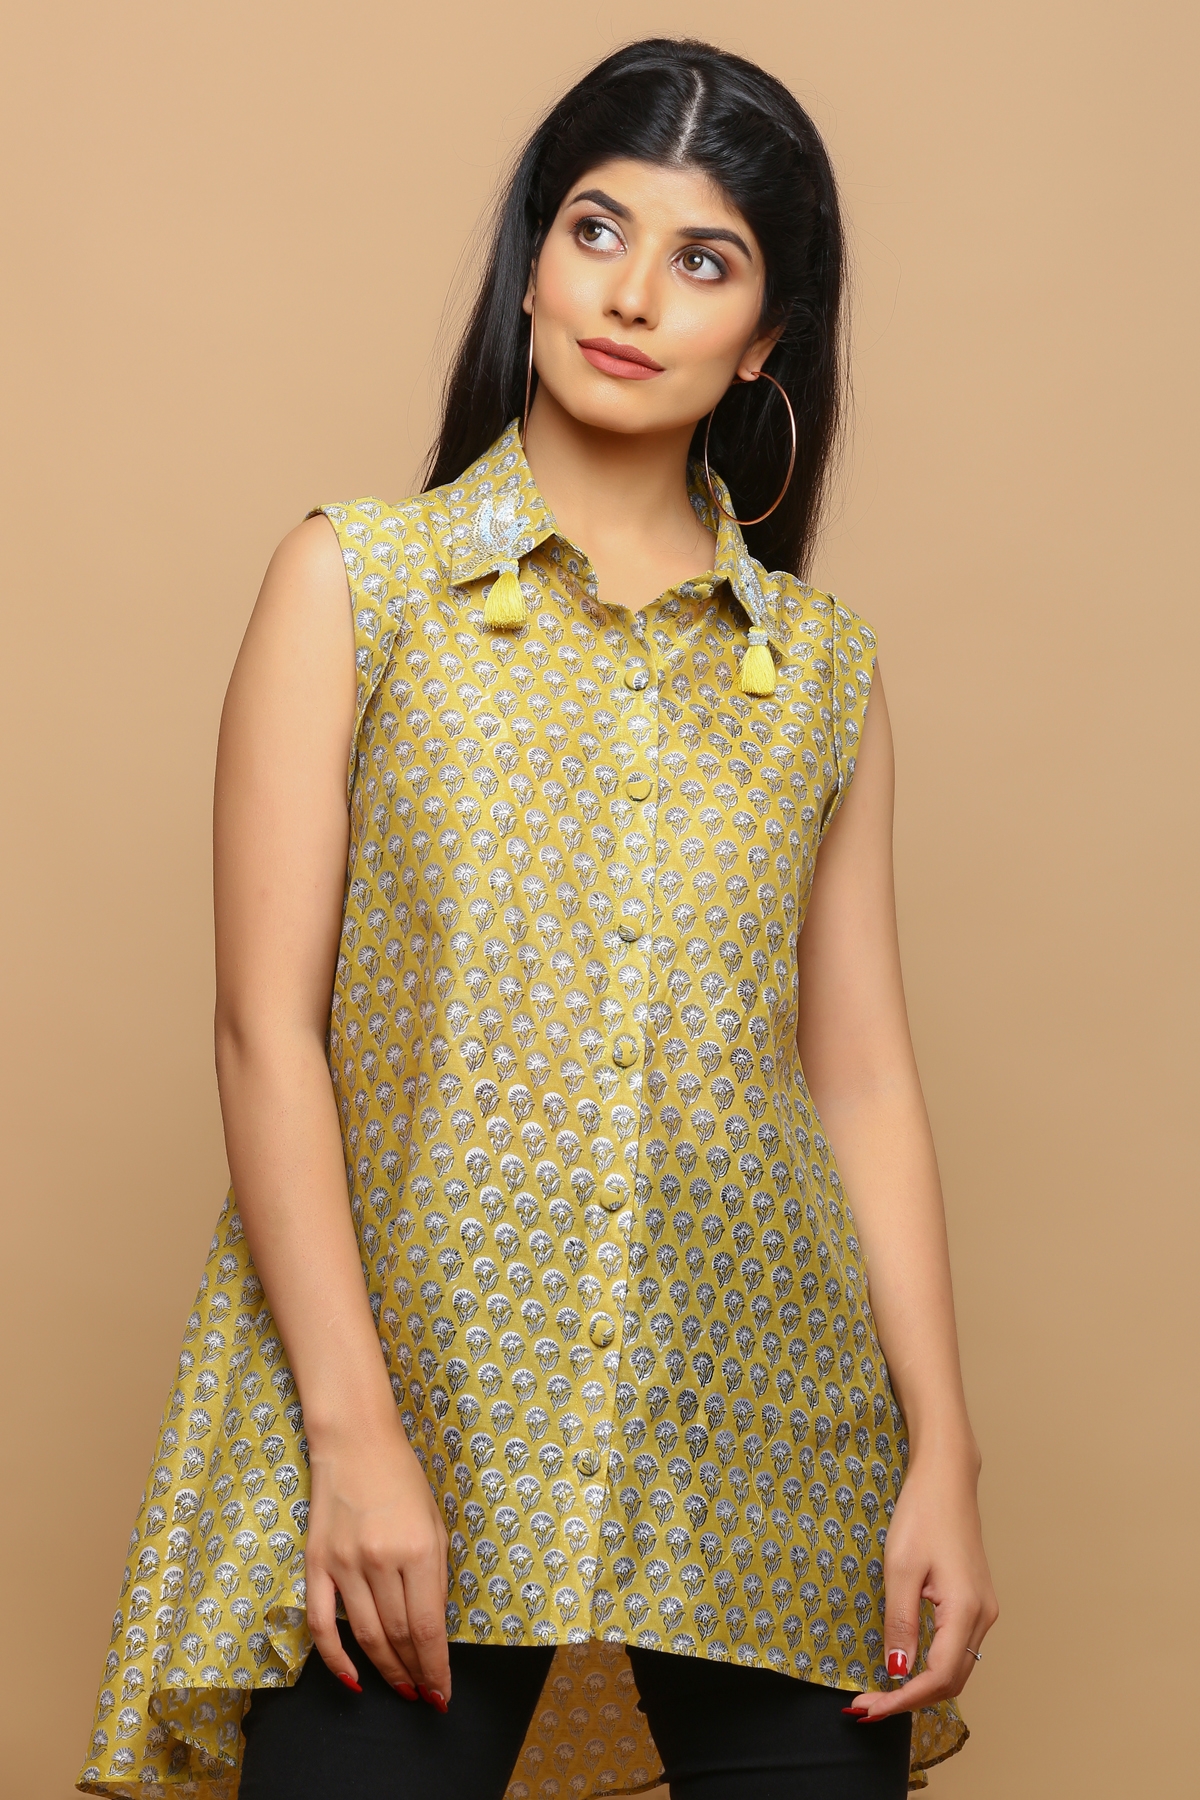 Chanderi a- symetrical top with hand work detailing on the collar